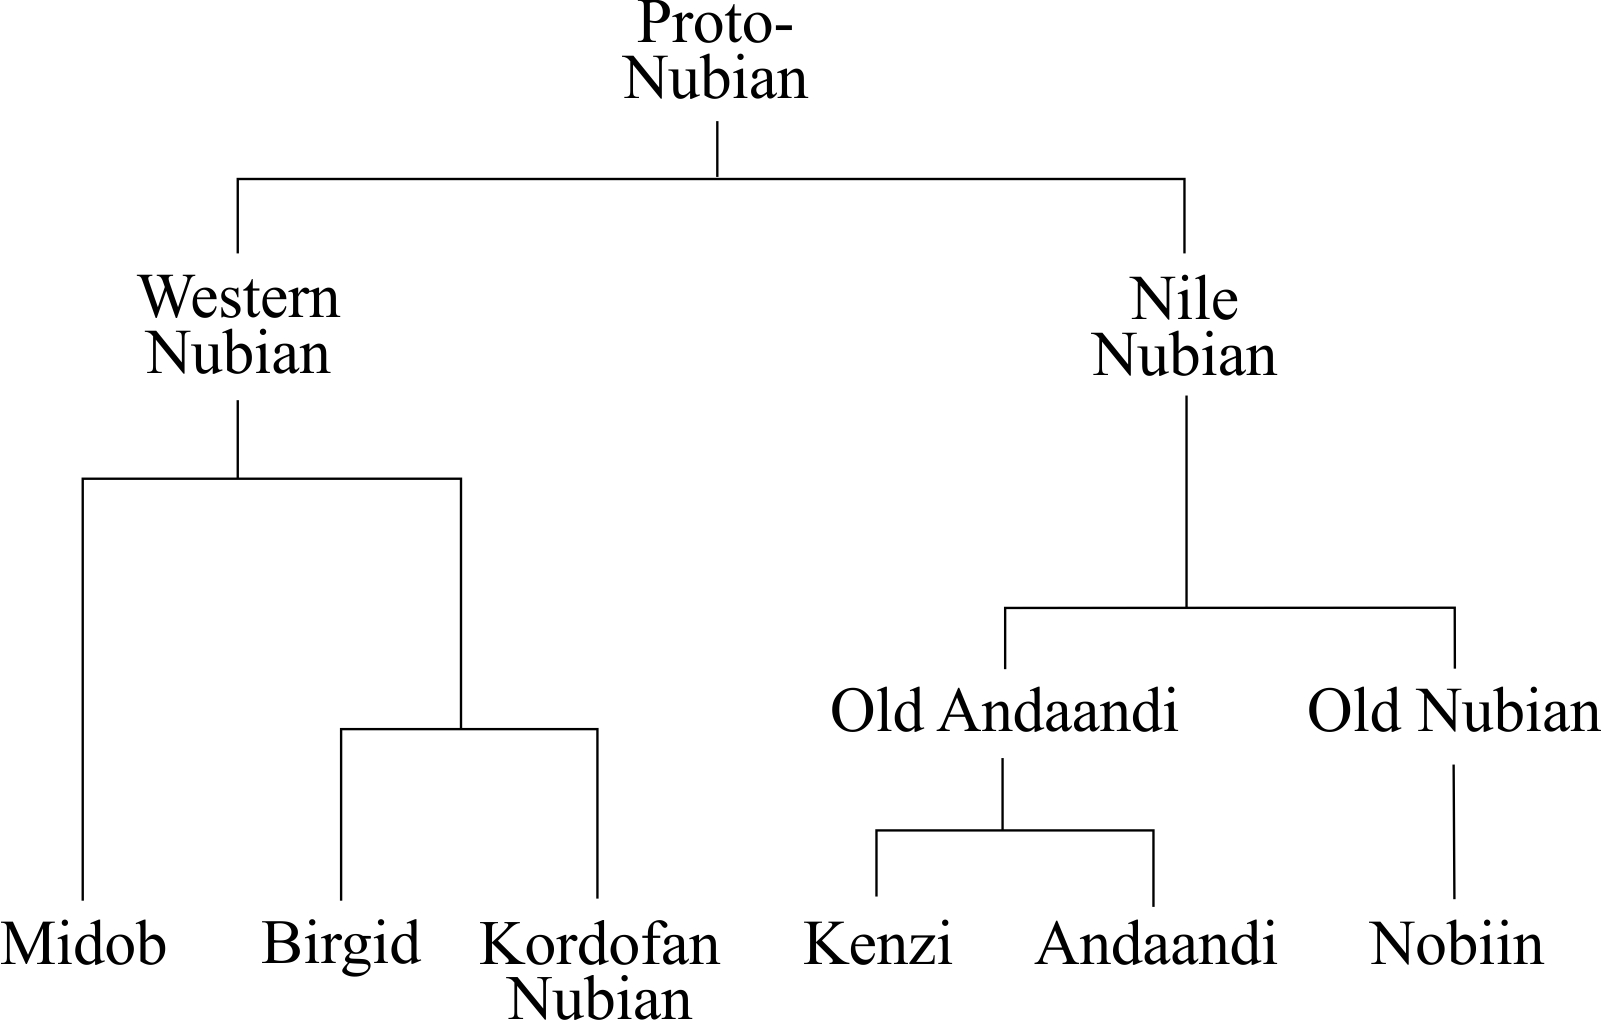 Family tree model of the Nubian languages